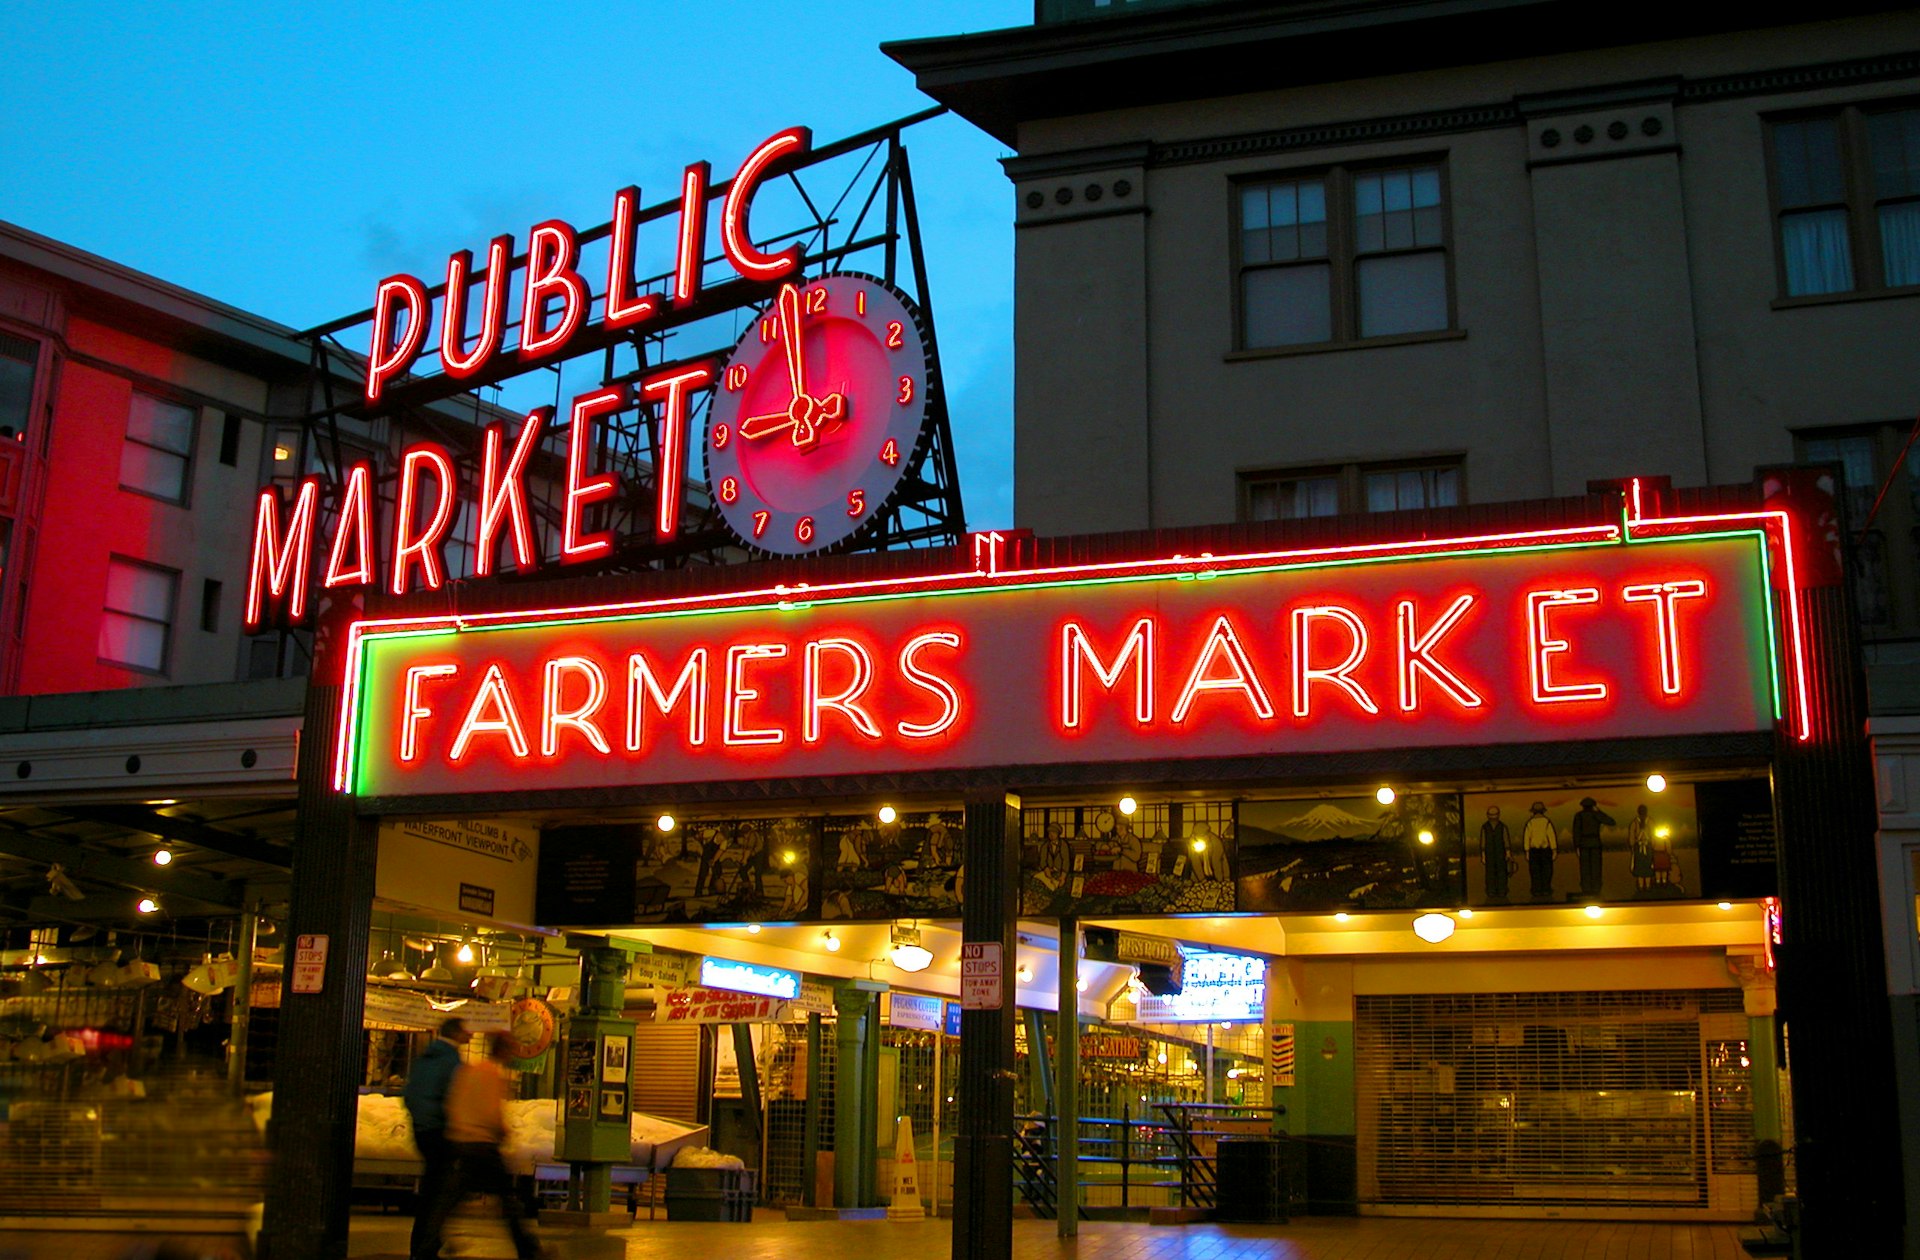 Red neon sign for the Pike Place farmers market